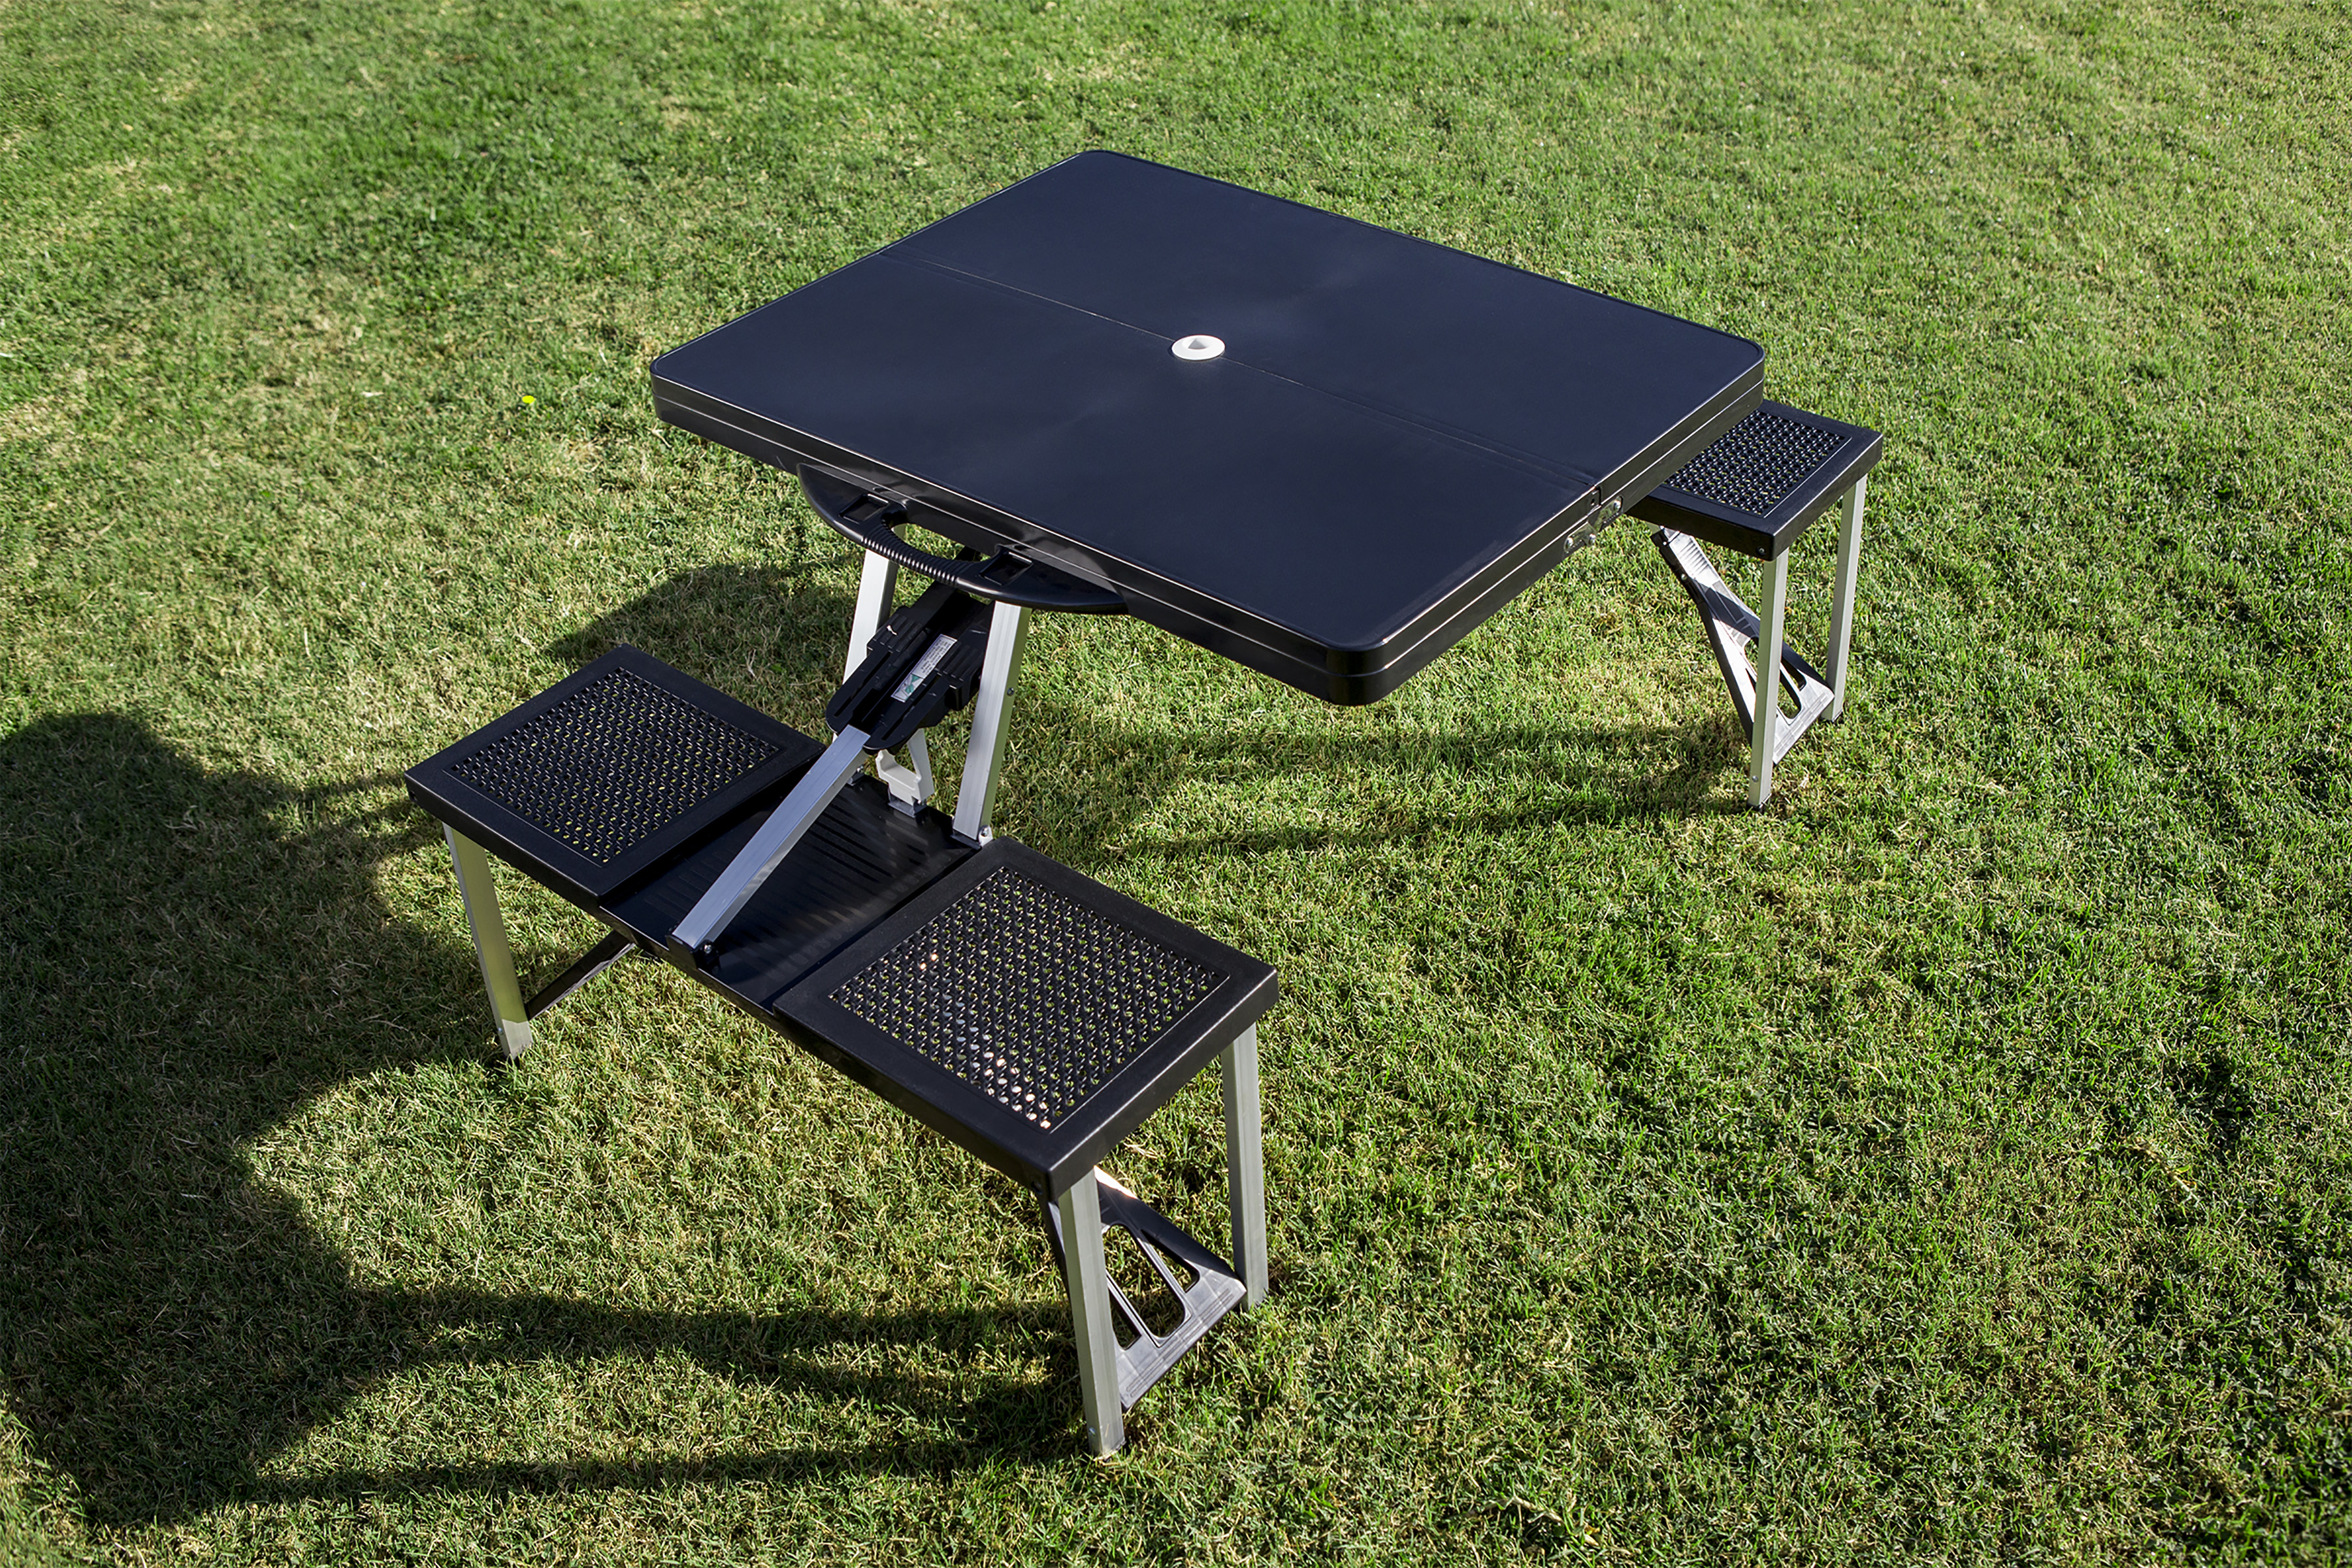 Football Field - Detroit Lions - Picnic Table Portable Folding Table with Seats